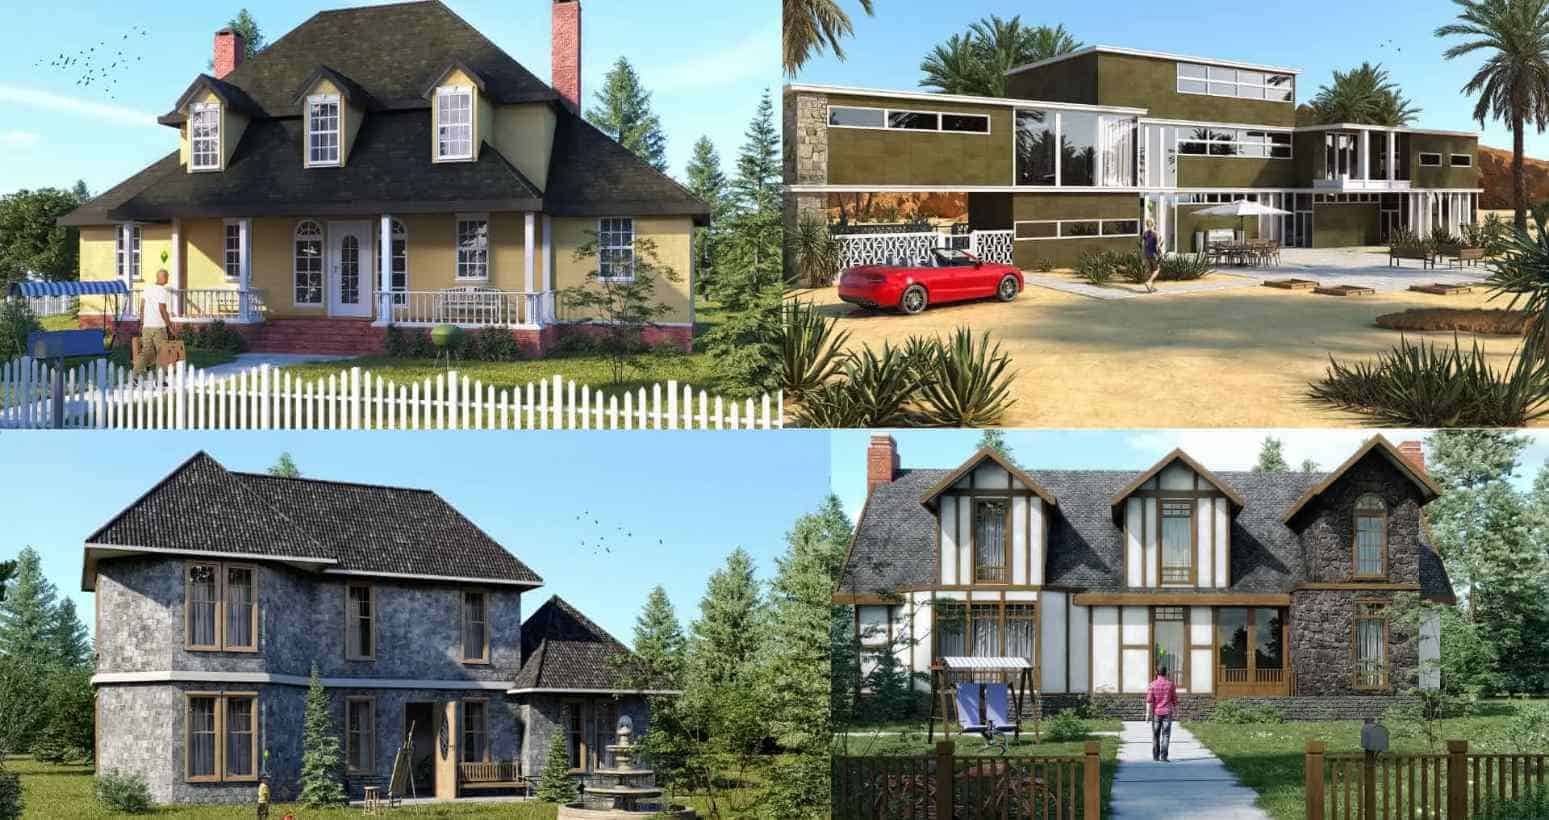 Sims 4 houses: Real-life renders of iconic lots